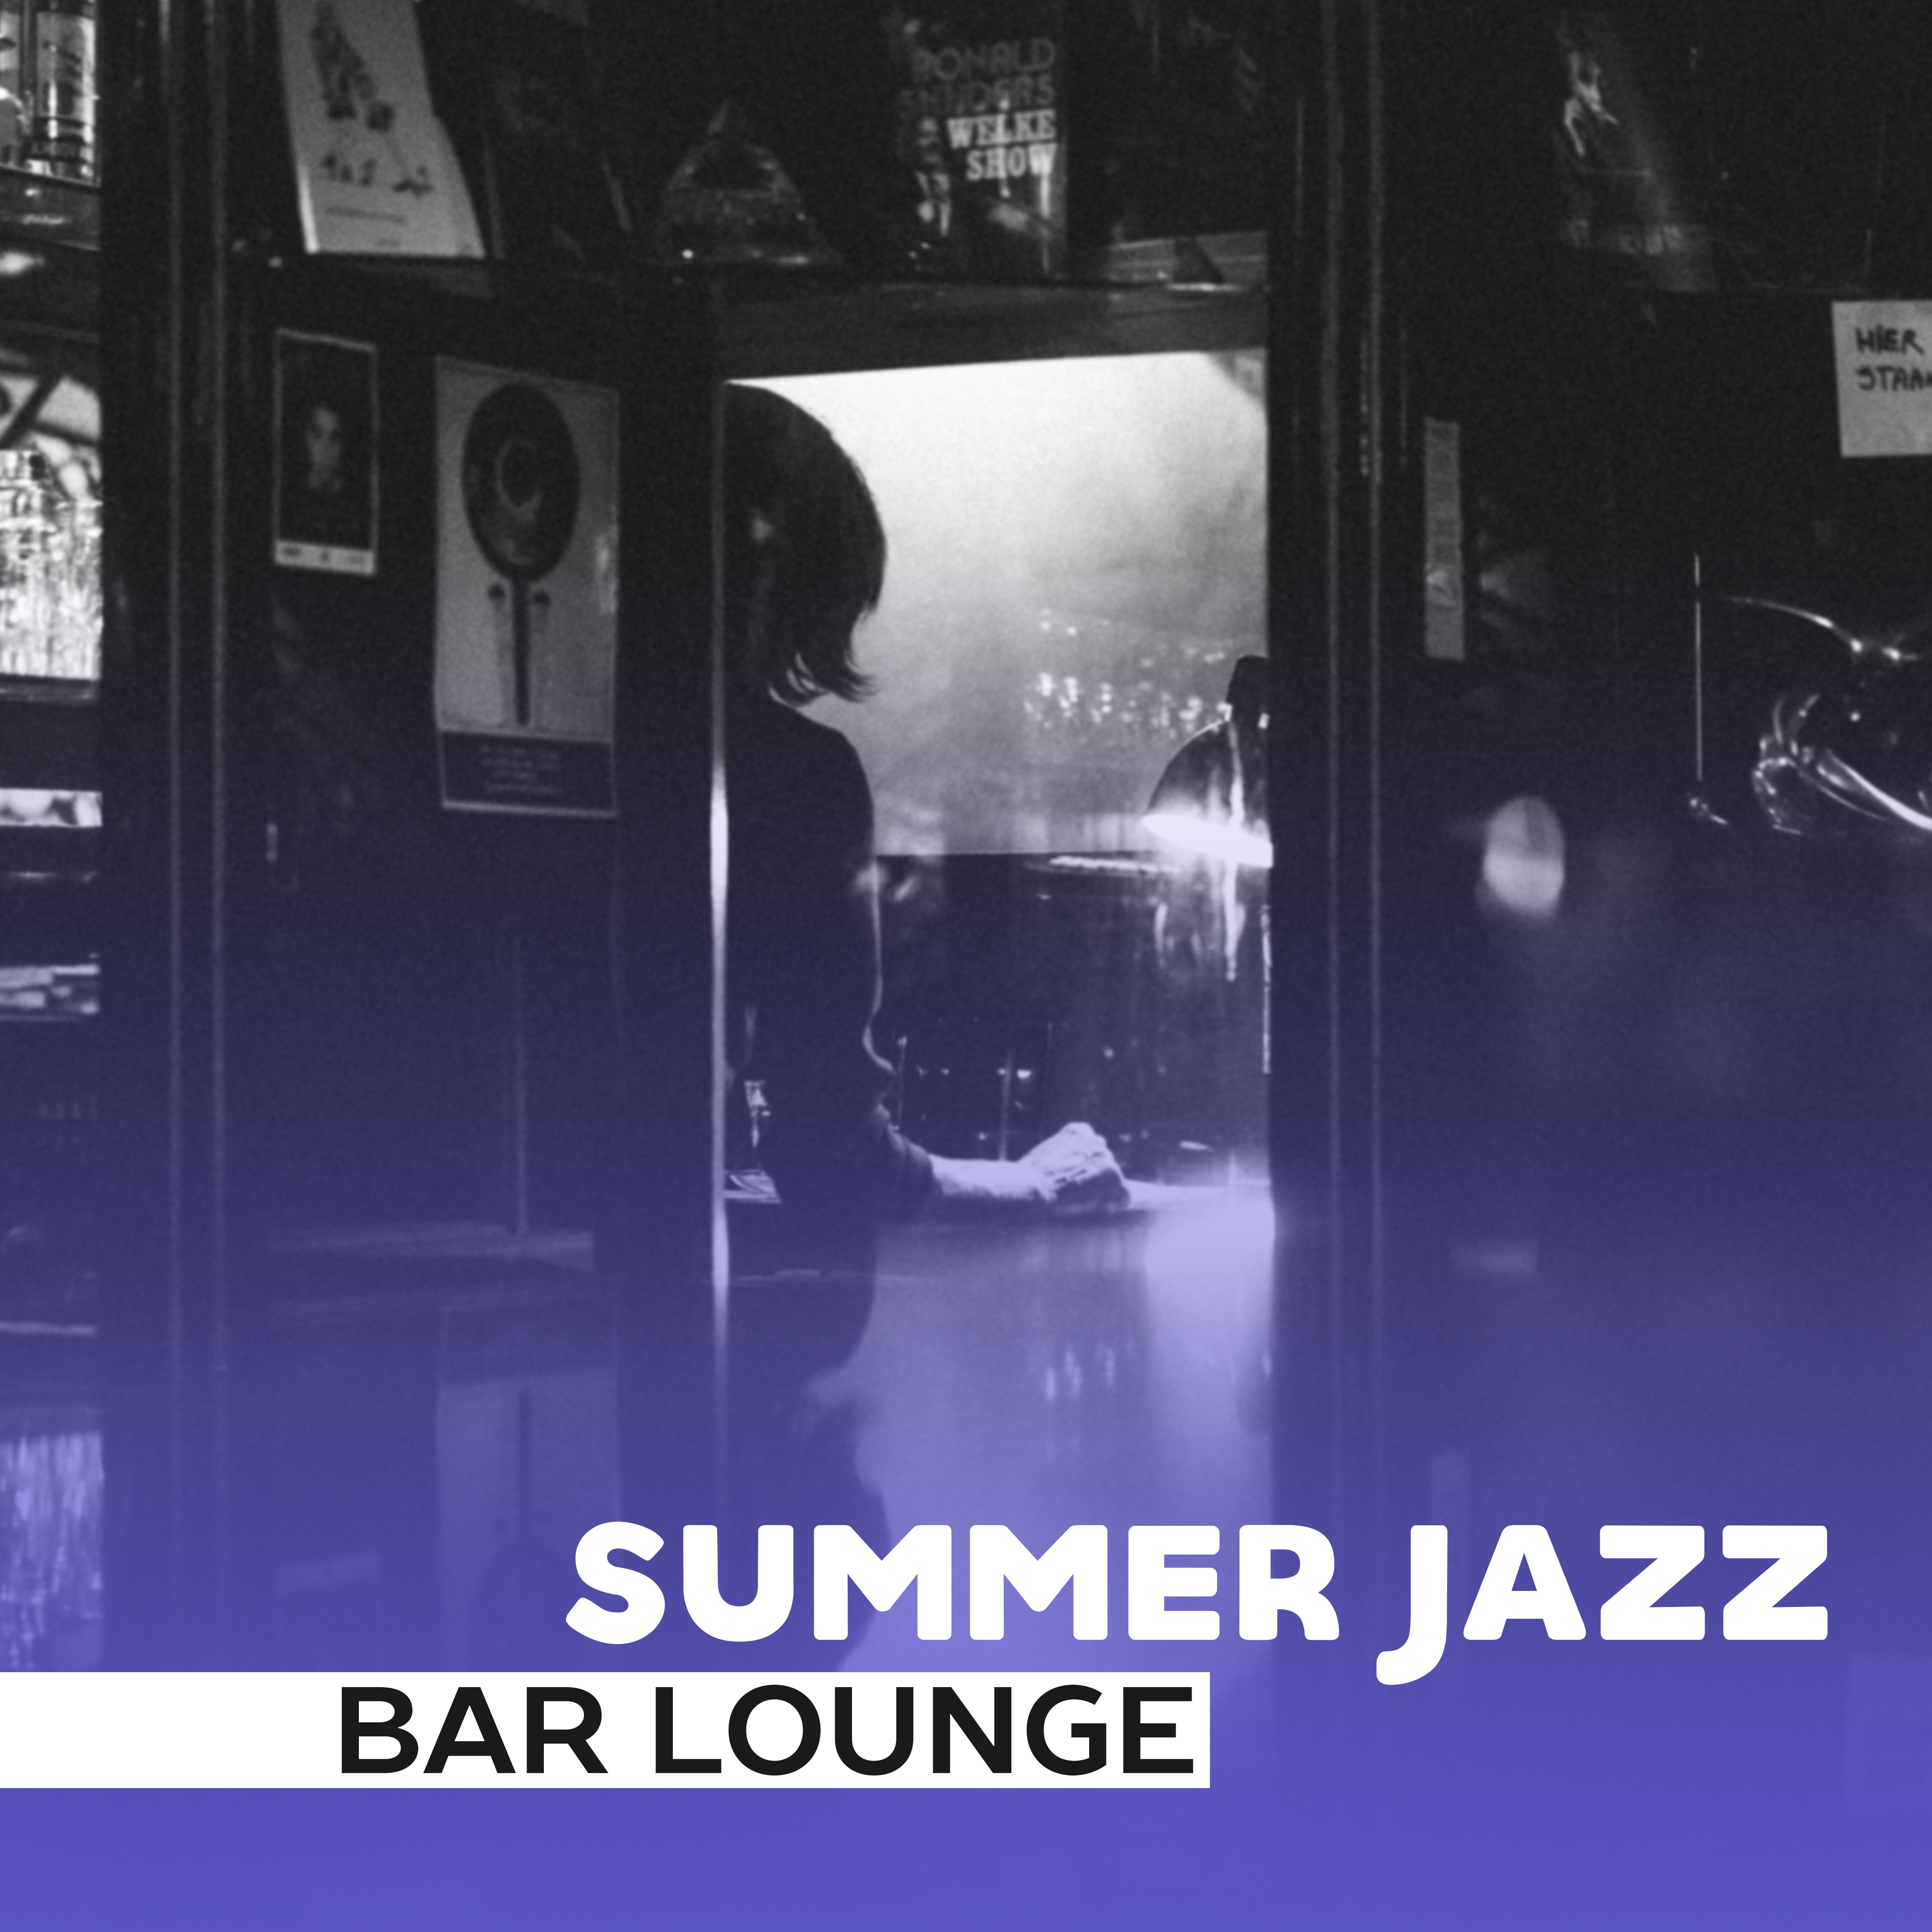 Summer Jazz Bar Lounge  Smooth Jazz Instrumental, Relaxed Vibes, Jazz Session, Ambient Lounge